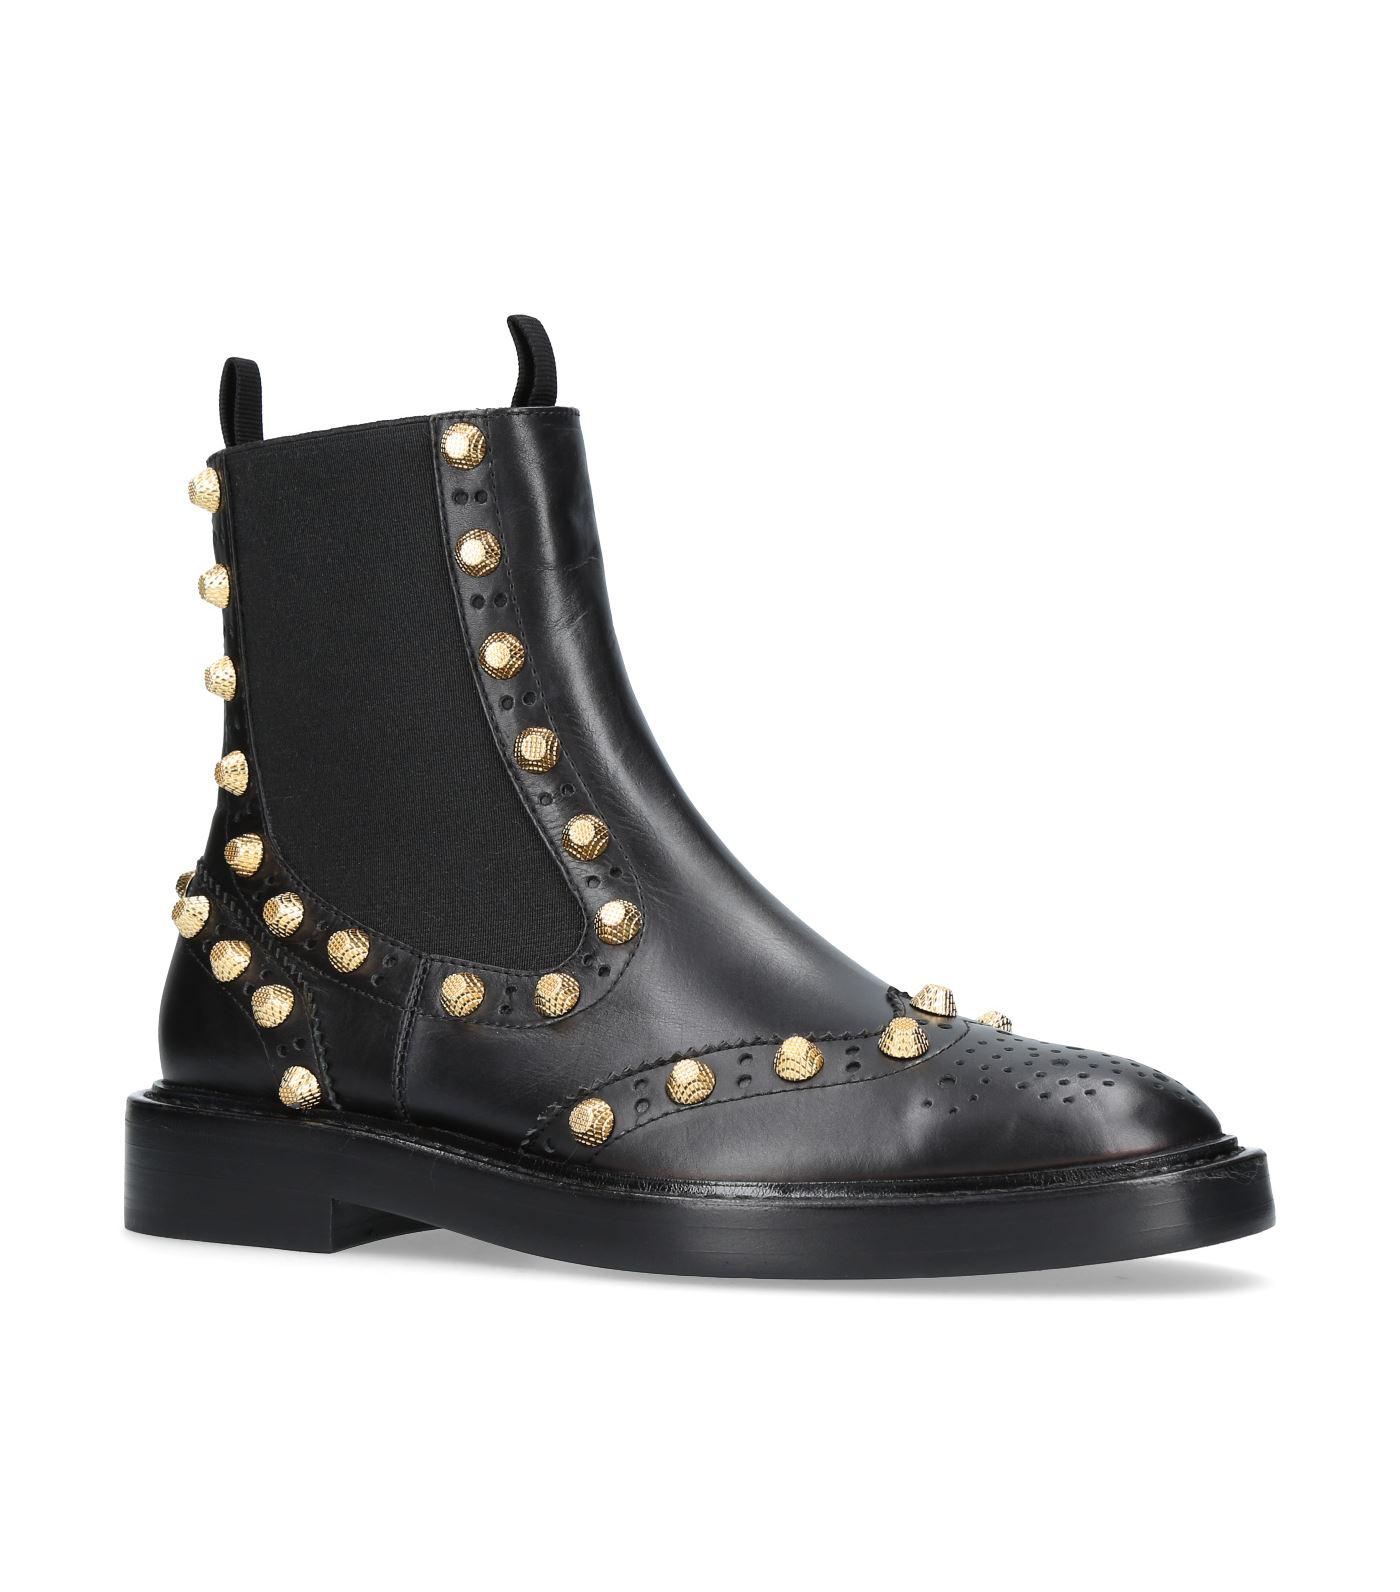 Balenciaga Studded Chelsea Boots in | Lyst